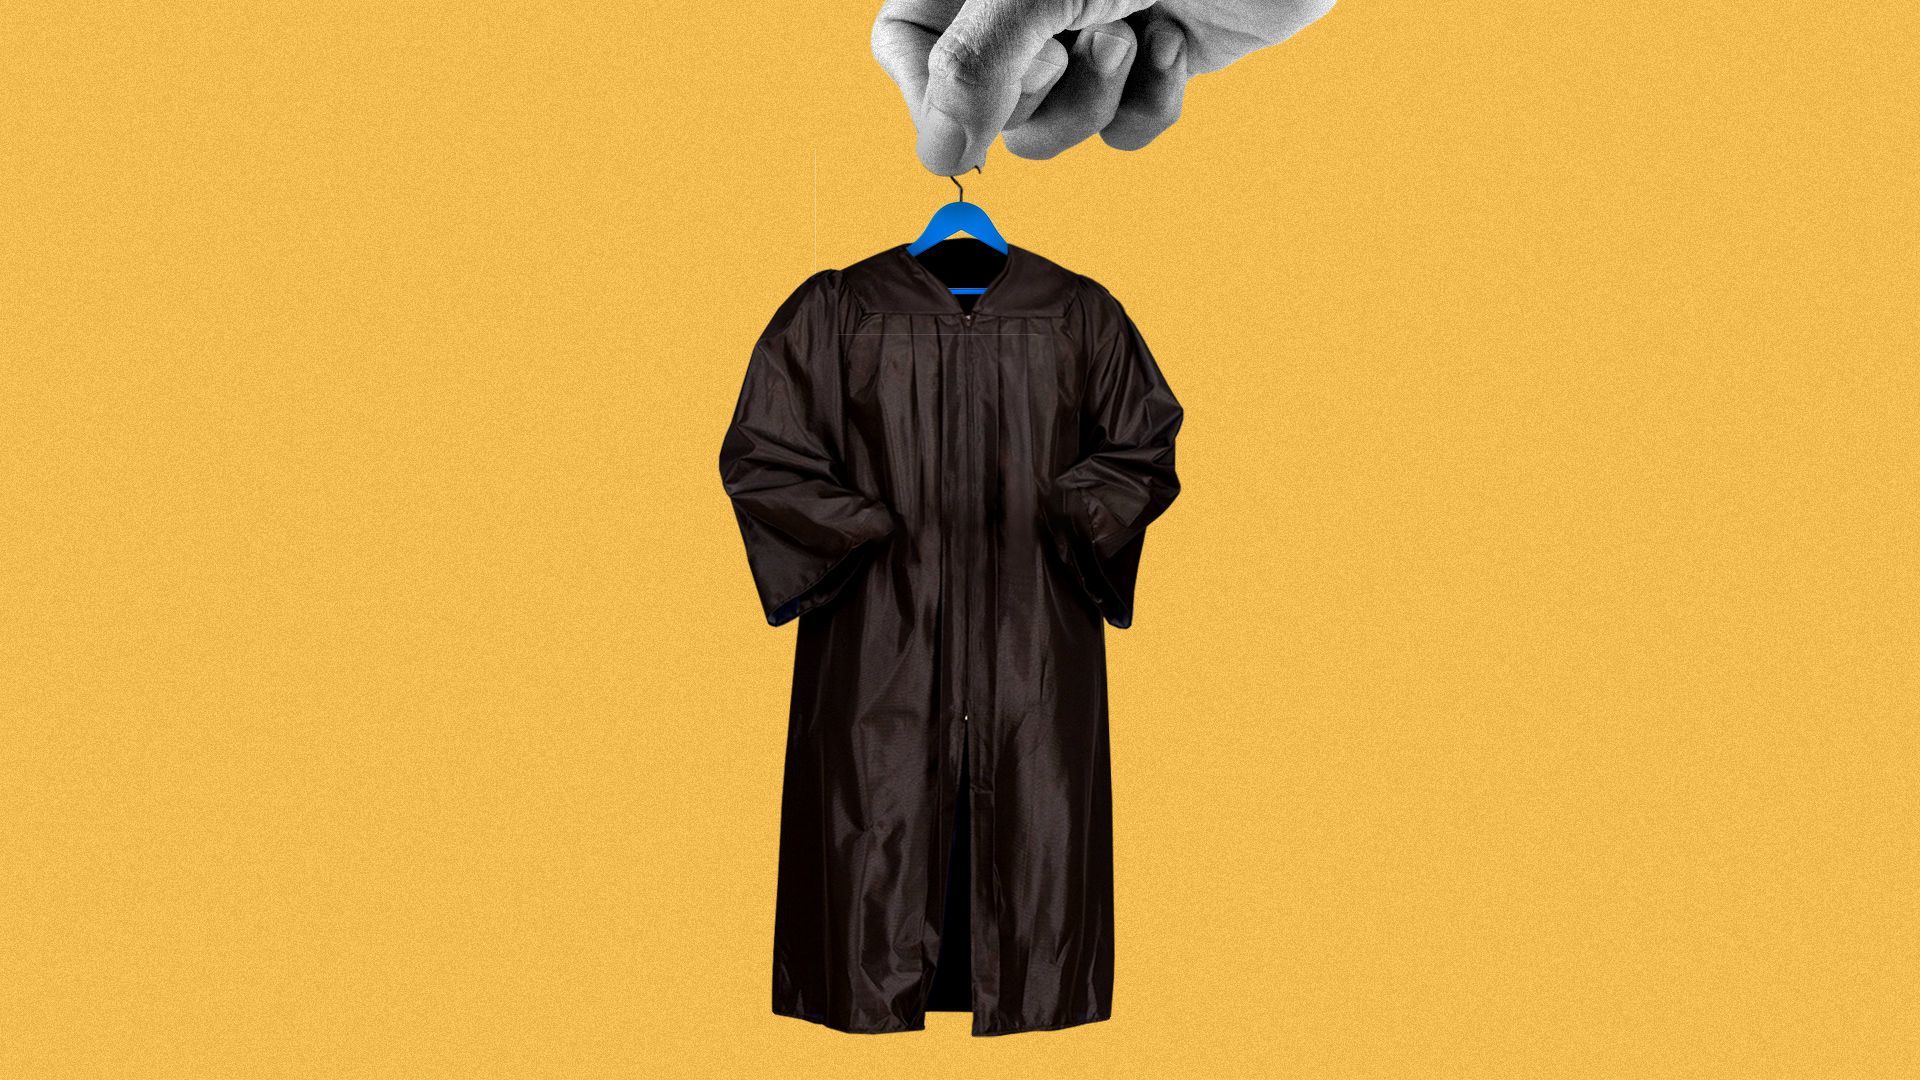 Illustration of a large hand holding a judge robe on a clothes hanger